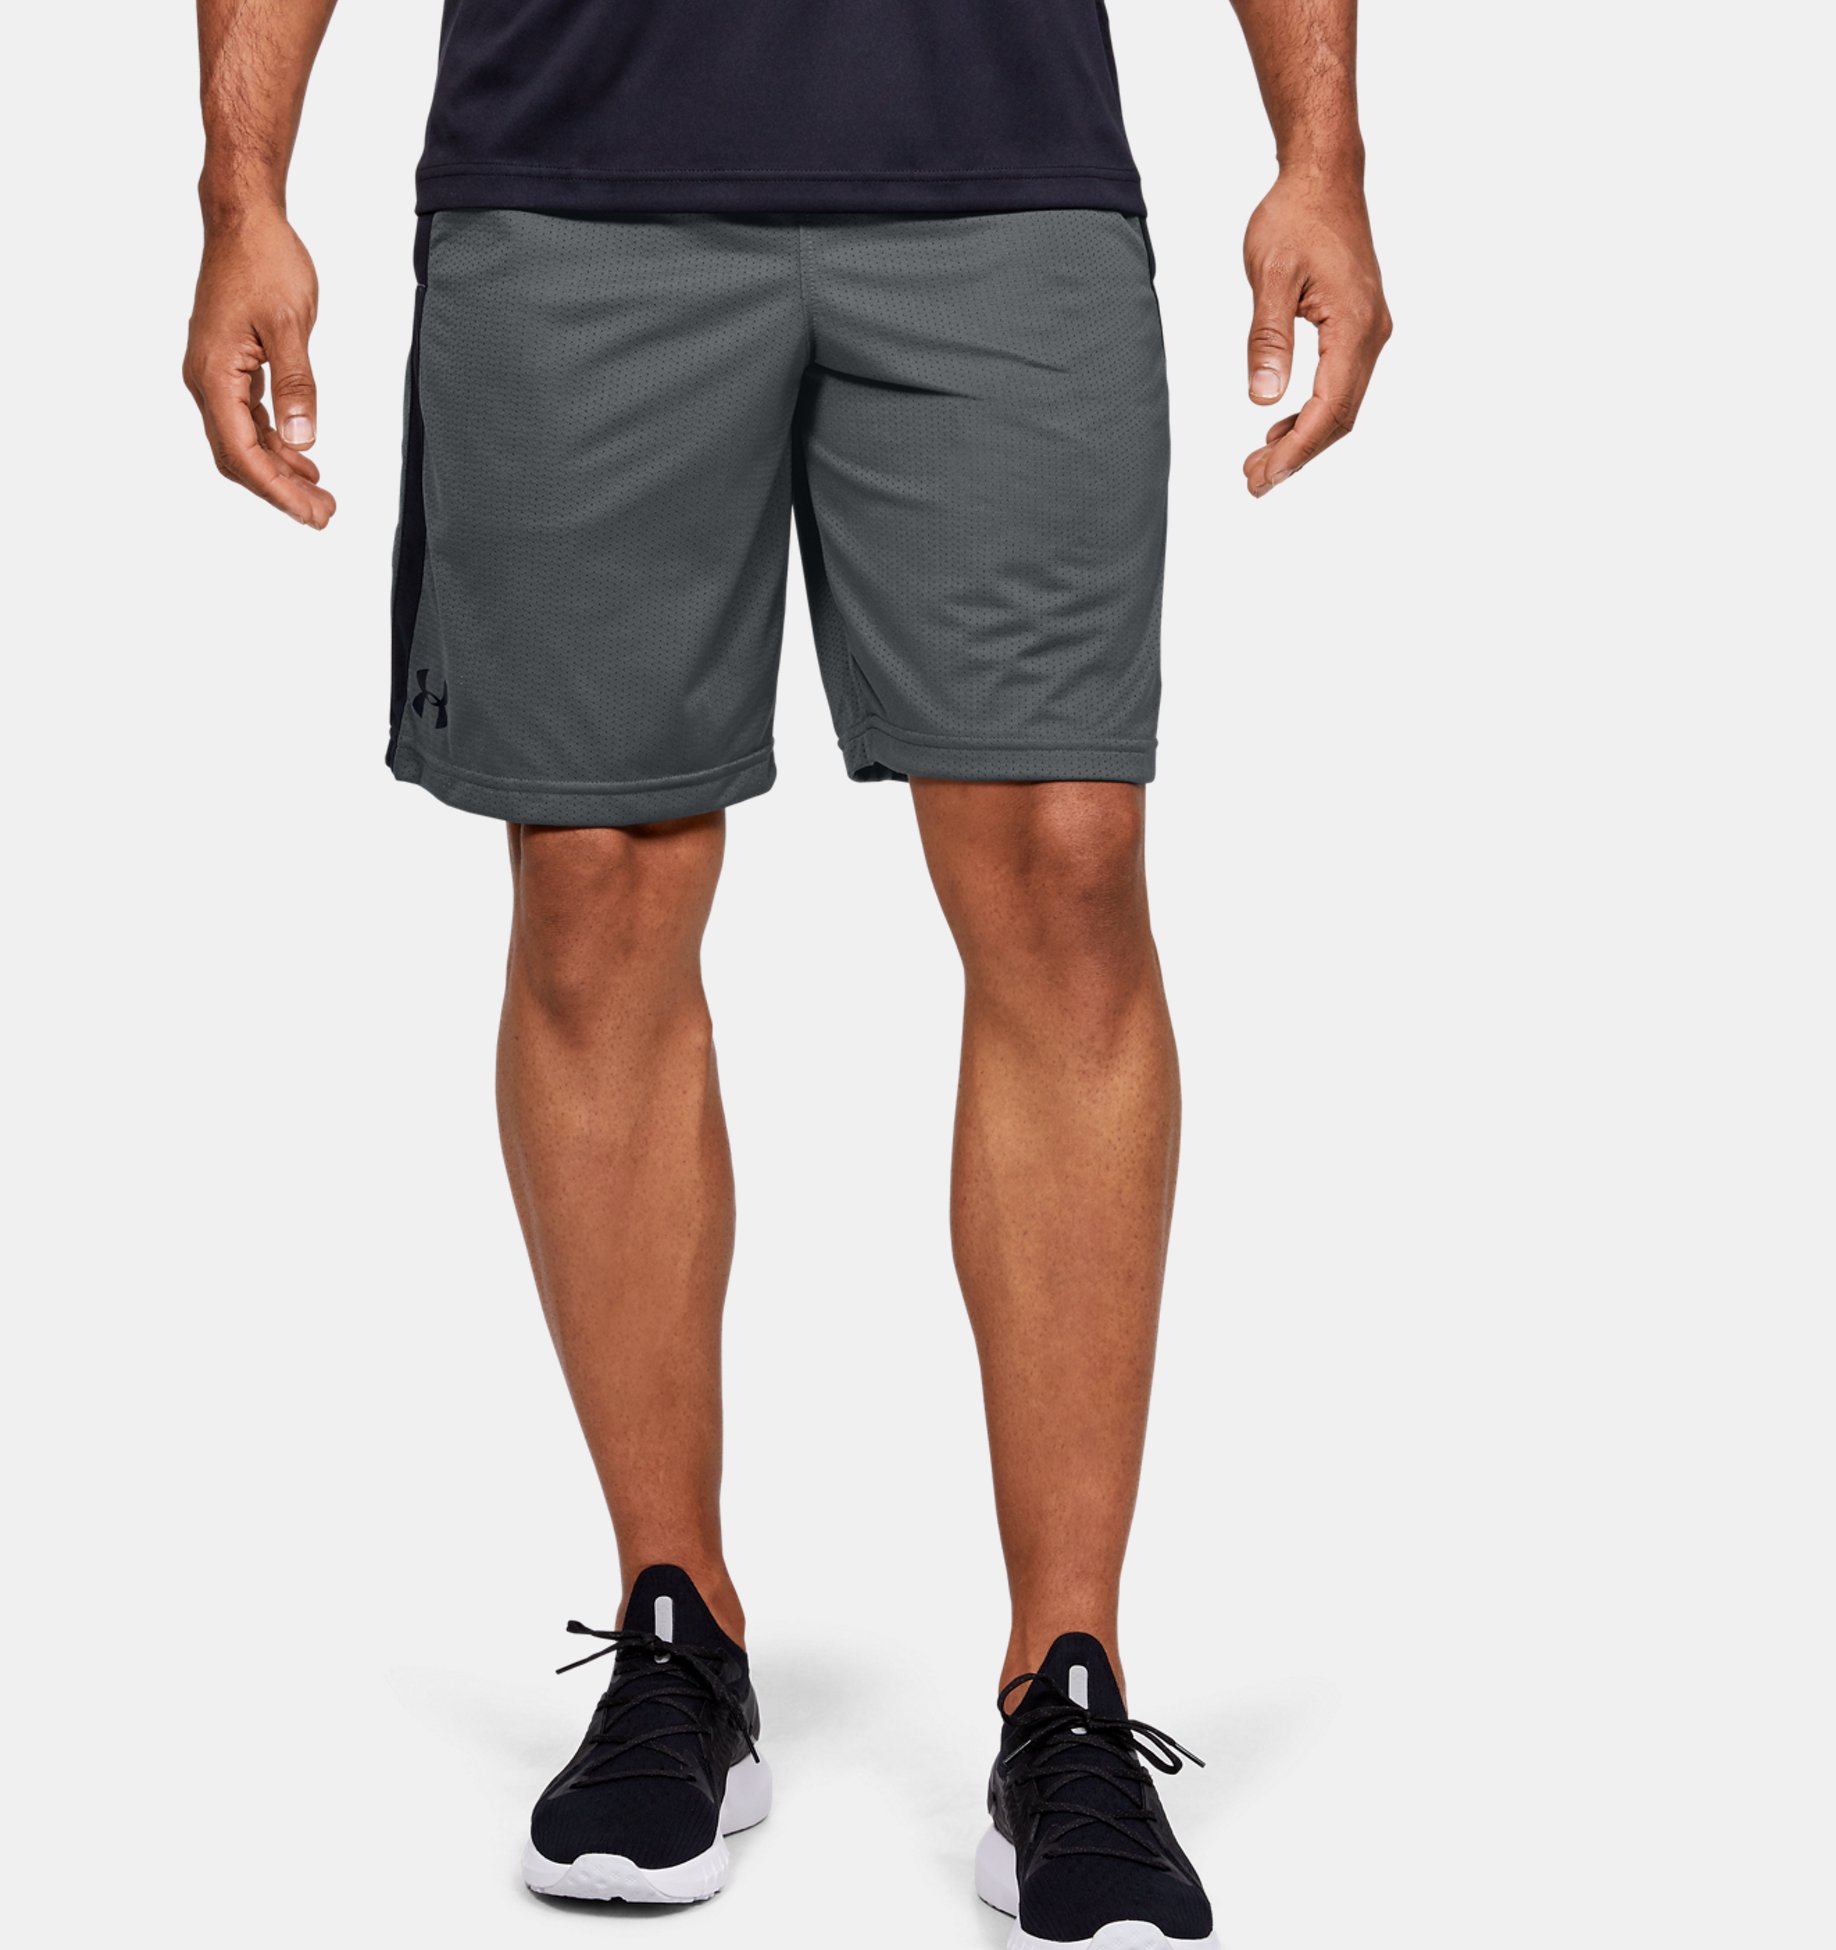 Versatile Sports Shorts for Training Running and Working Out Under Armour Mens Ua Tech Mesh Short Mens Gym Shorts with Complete Ventilation